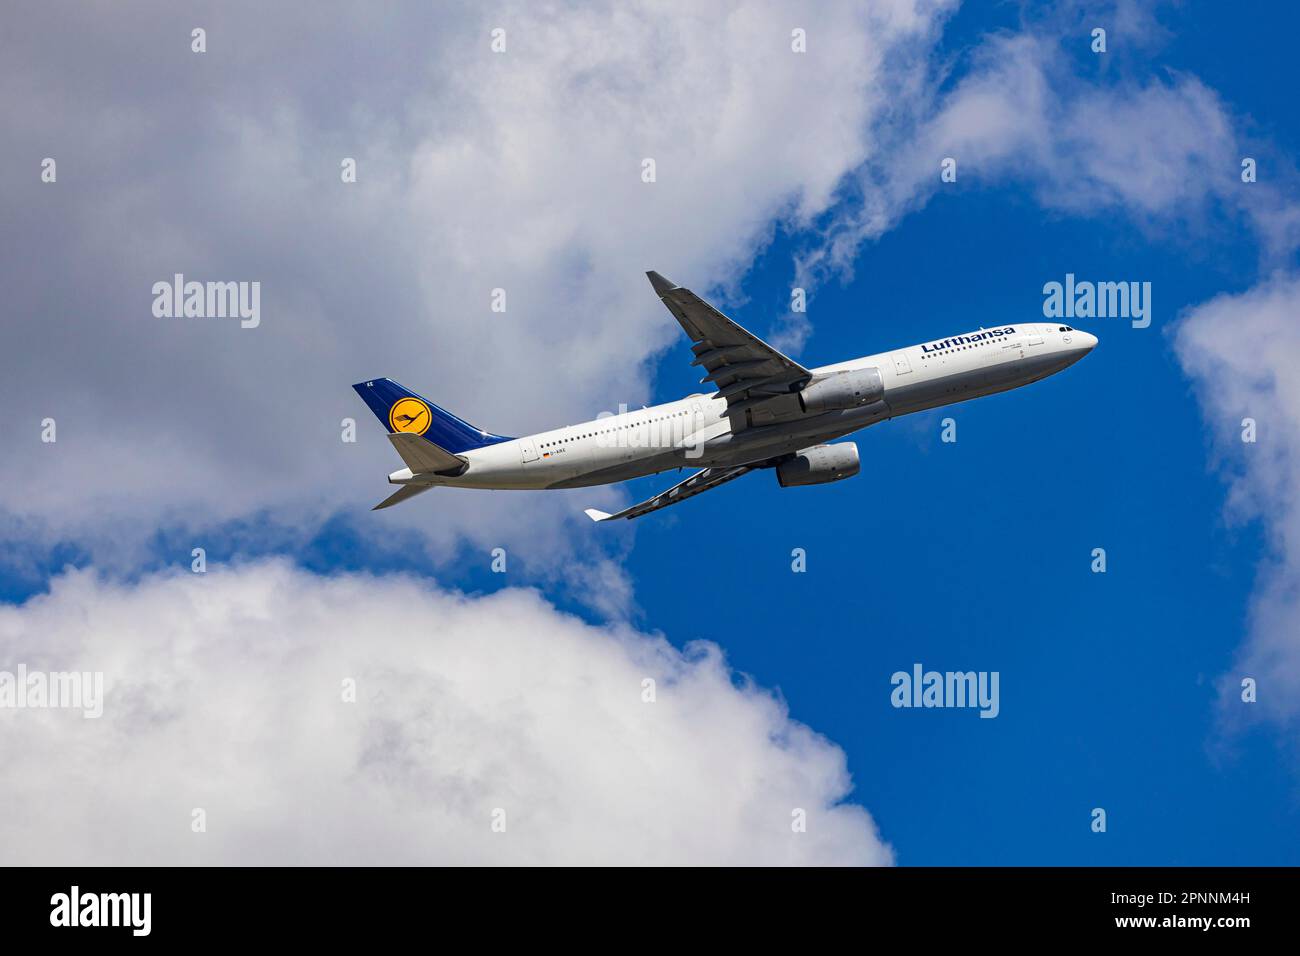 Airbus A330-300 of the airline Lufthansa taking off at Fraport Airport, Tower and Terminal, Frankfurt am Main, Hesse, Germany Stock Photo